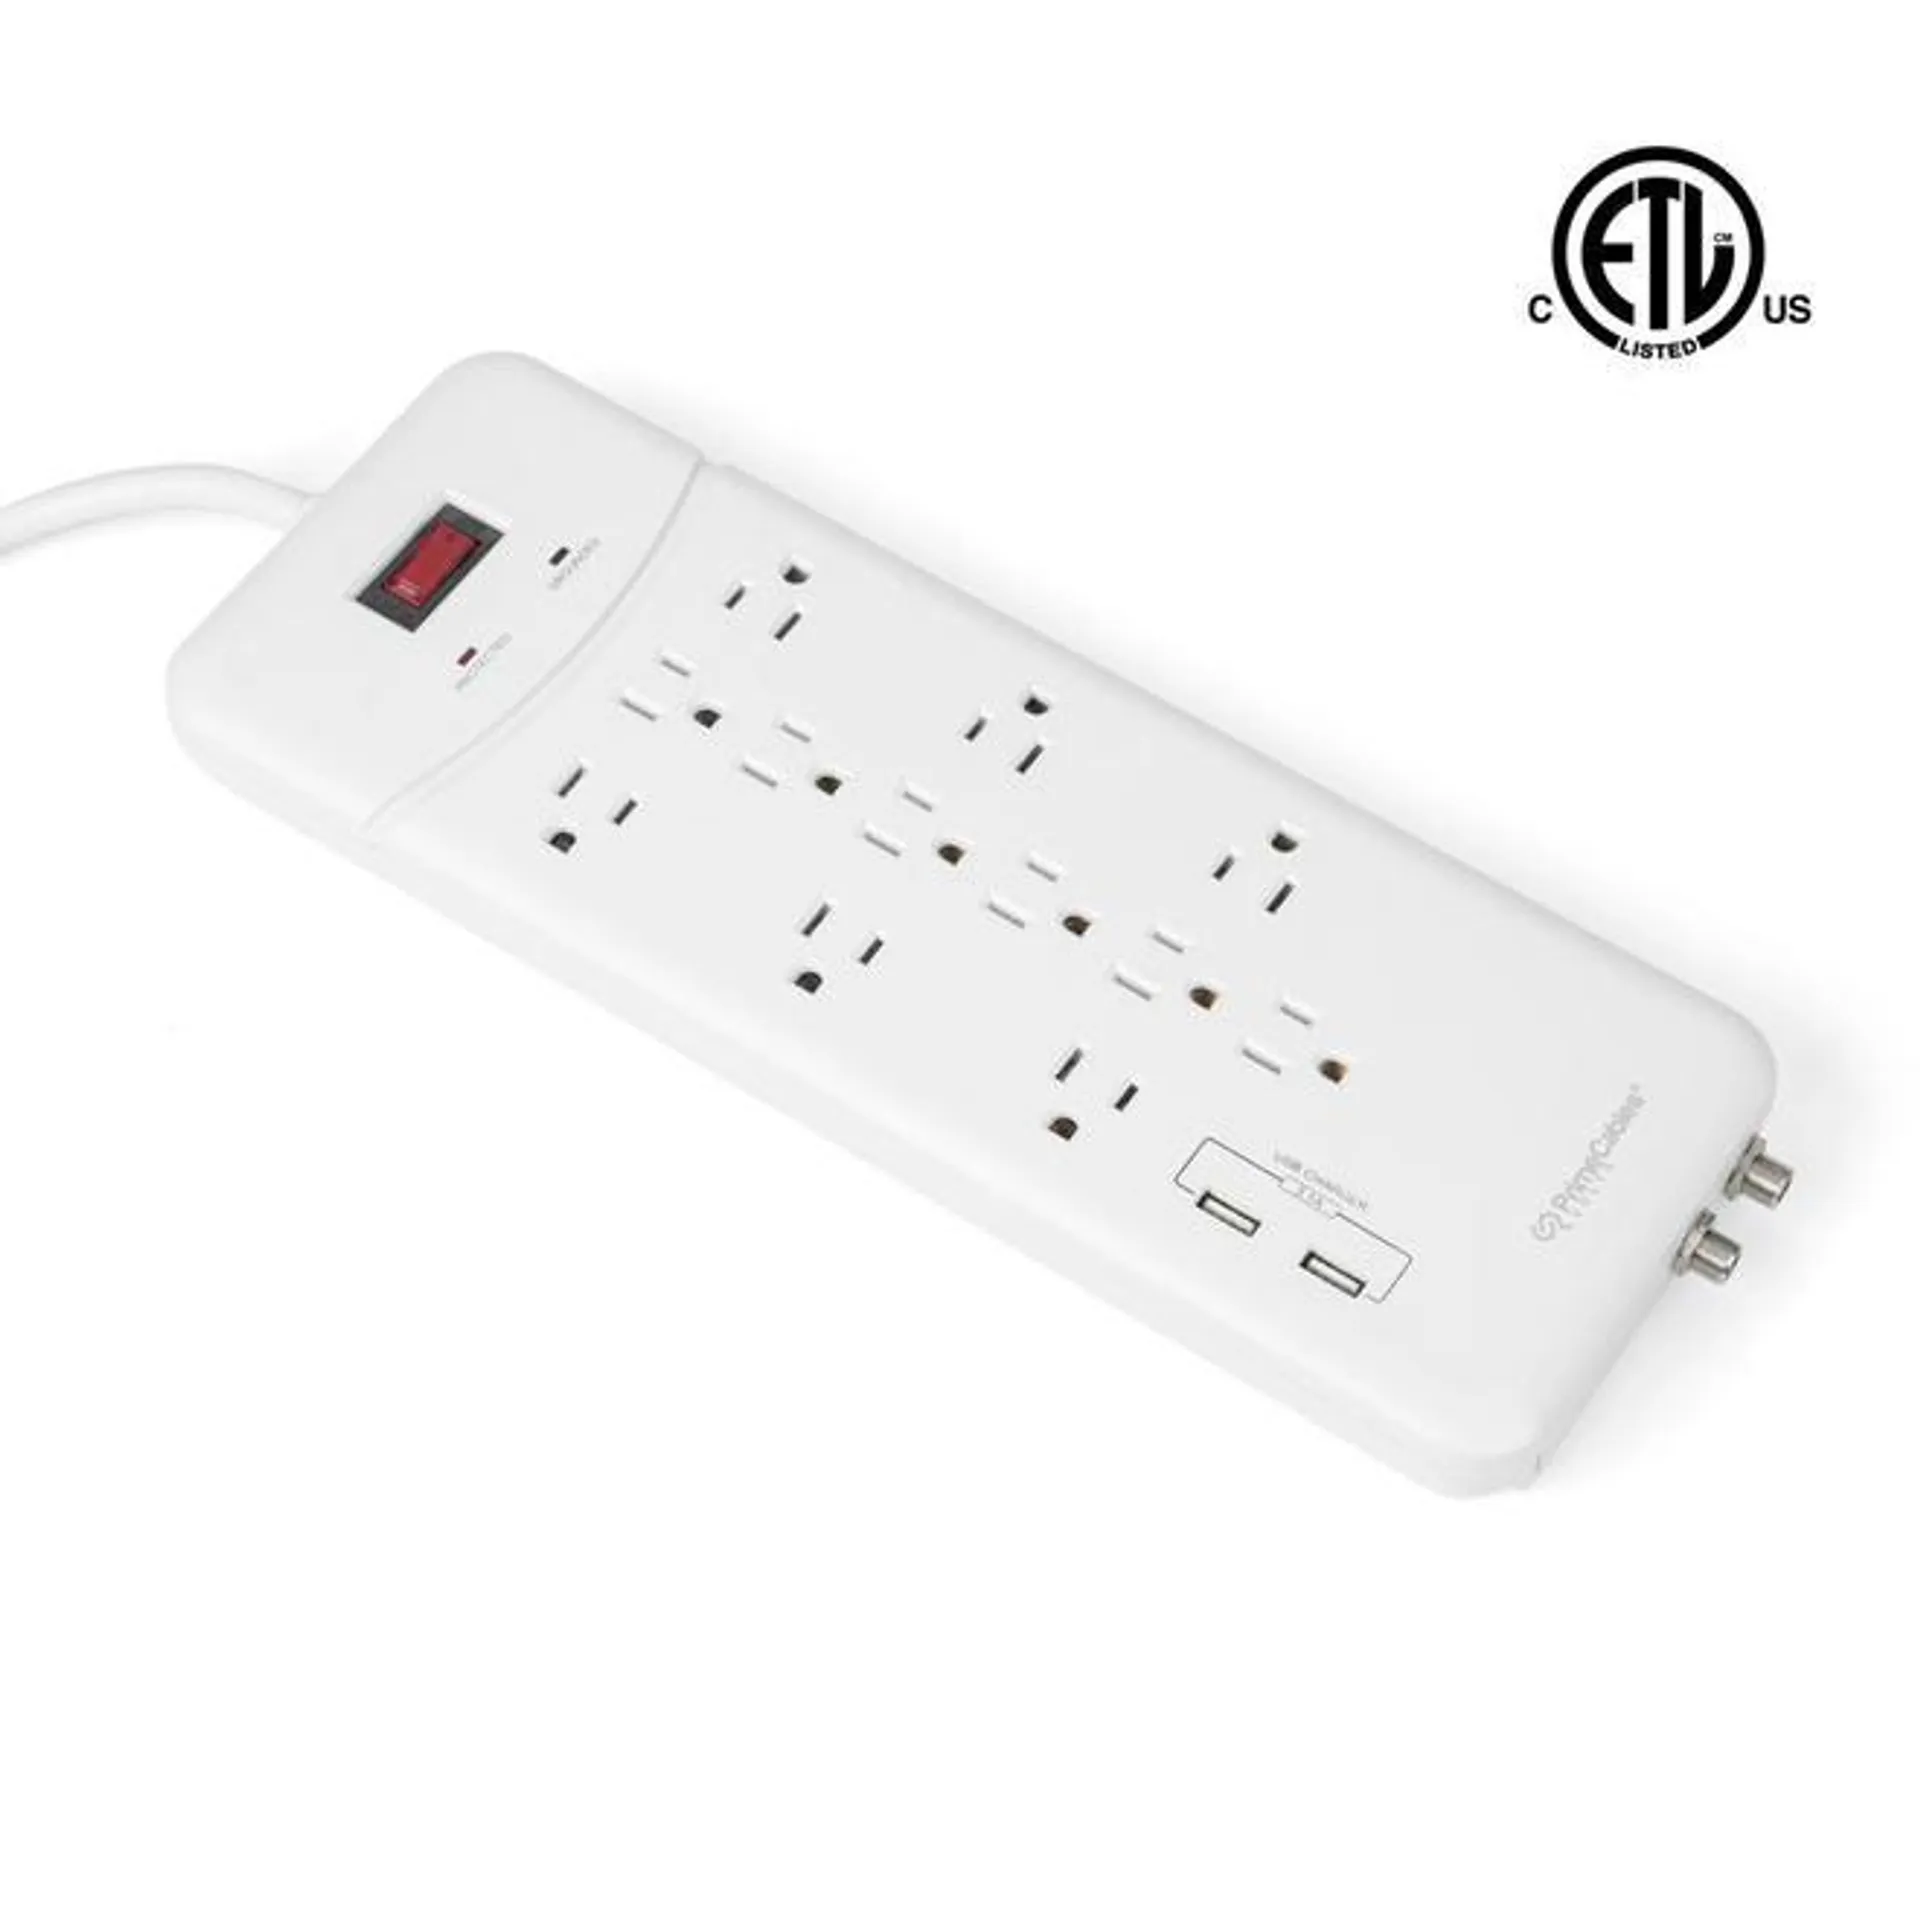 12 Outlets Surge Protector with 2 Ports USB Charger up to 3.1A Coaxial Breaker - PrimeCables®